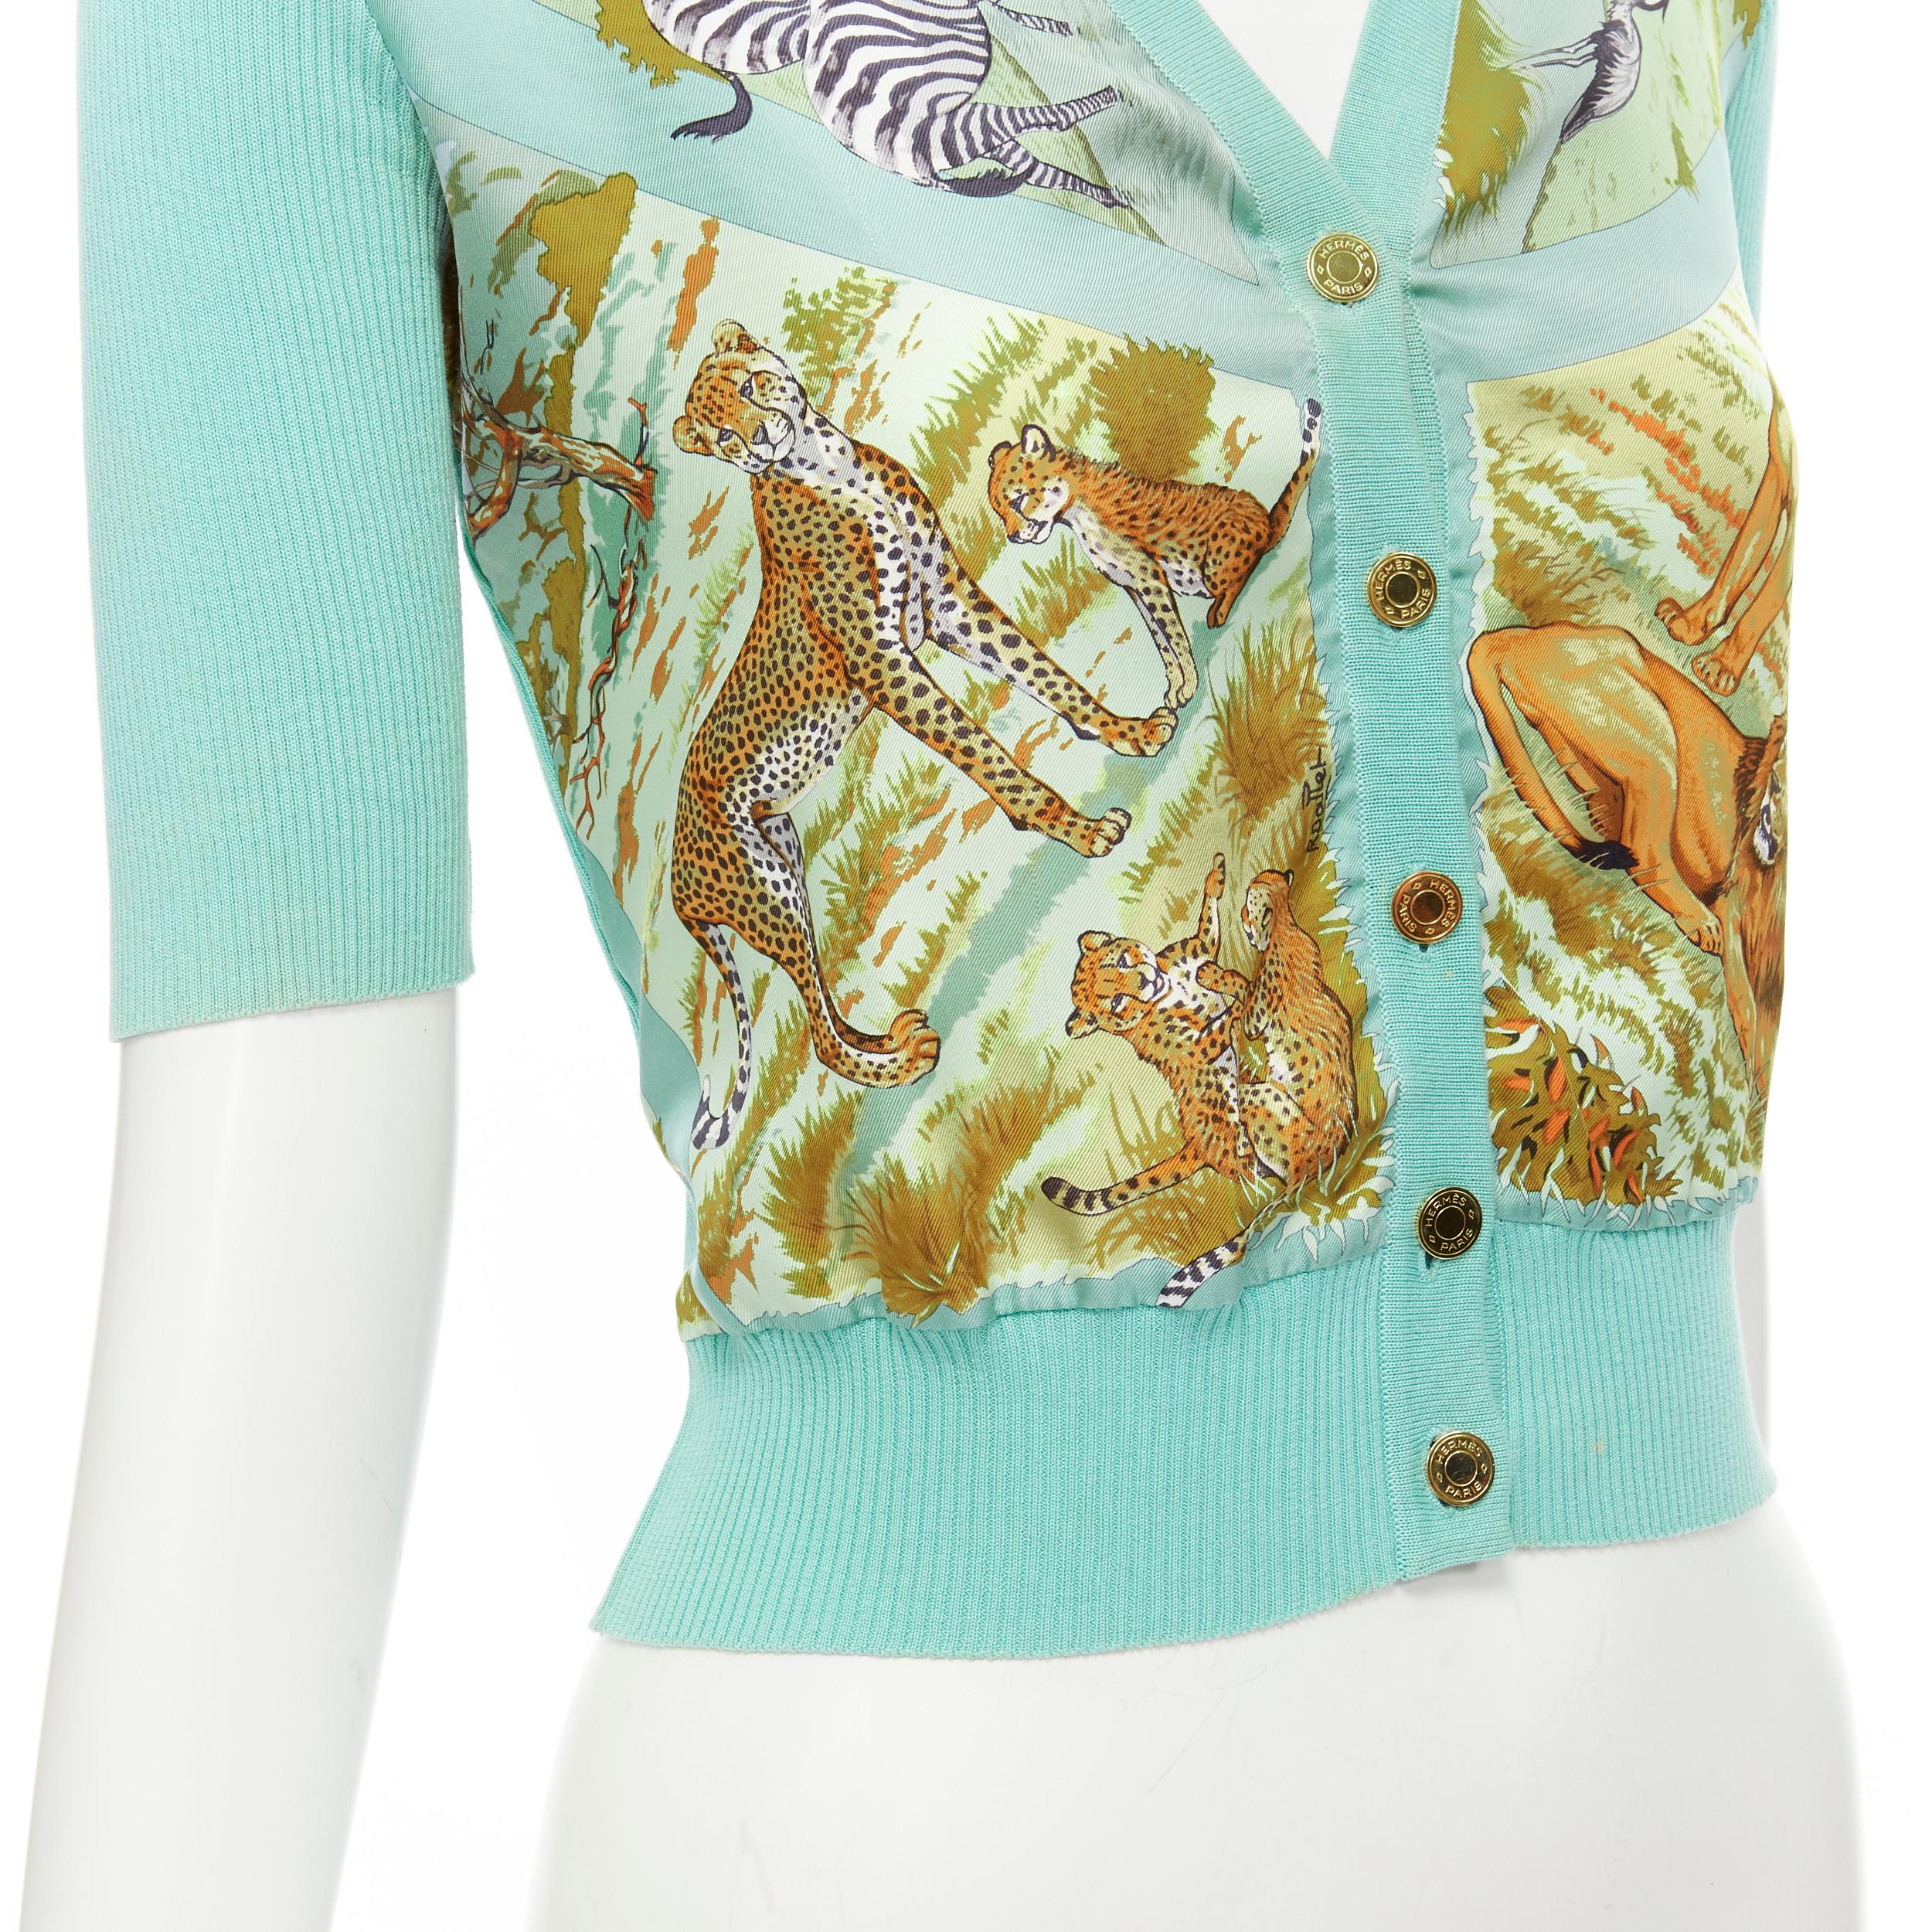 HERMES Vintage 100% silk animal print teal blue ribbed cotton cardigan FR38 M 
Reference: GIYG/A00199 
Brand: Hermes 
Material: Silk 
Color: Blue 
Pattern: Animal 
Closure: Button 
Extra Detail: Gold-tone Hermes logo button. 100% silk print panel.